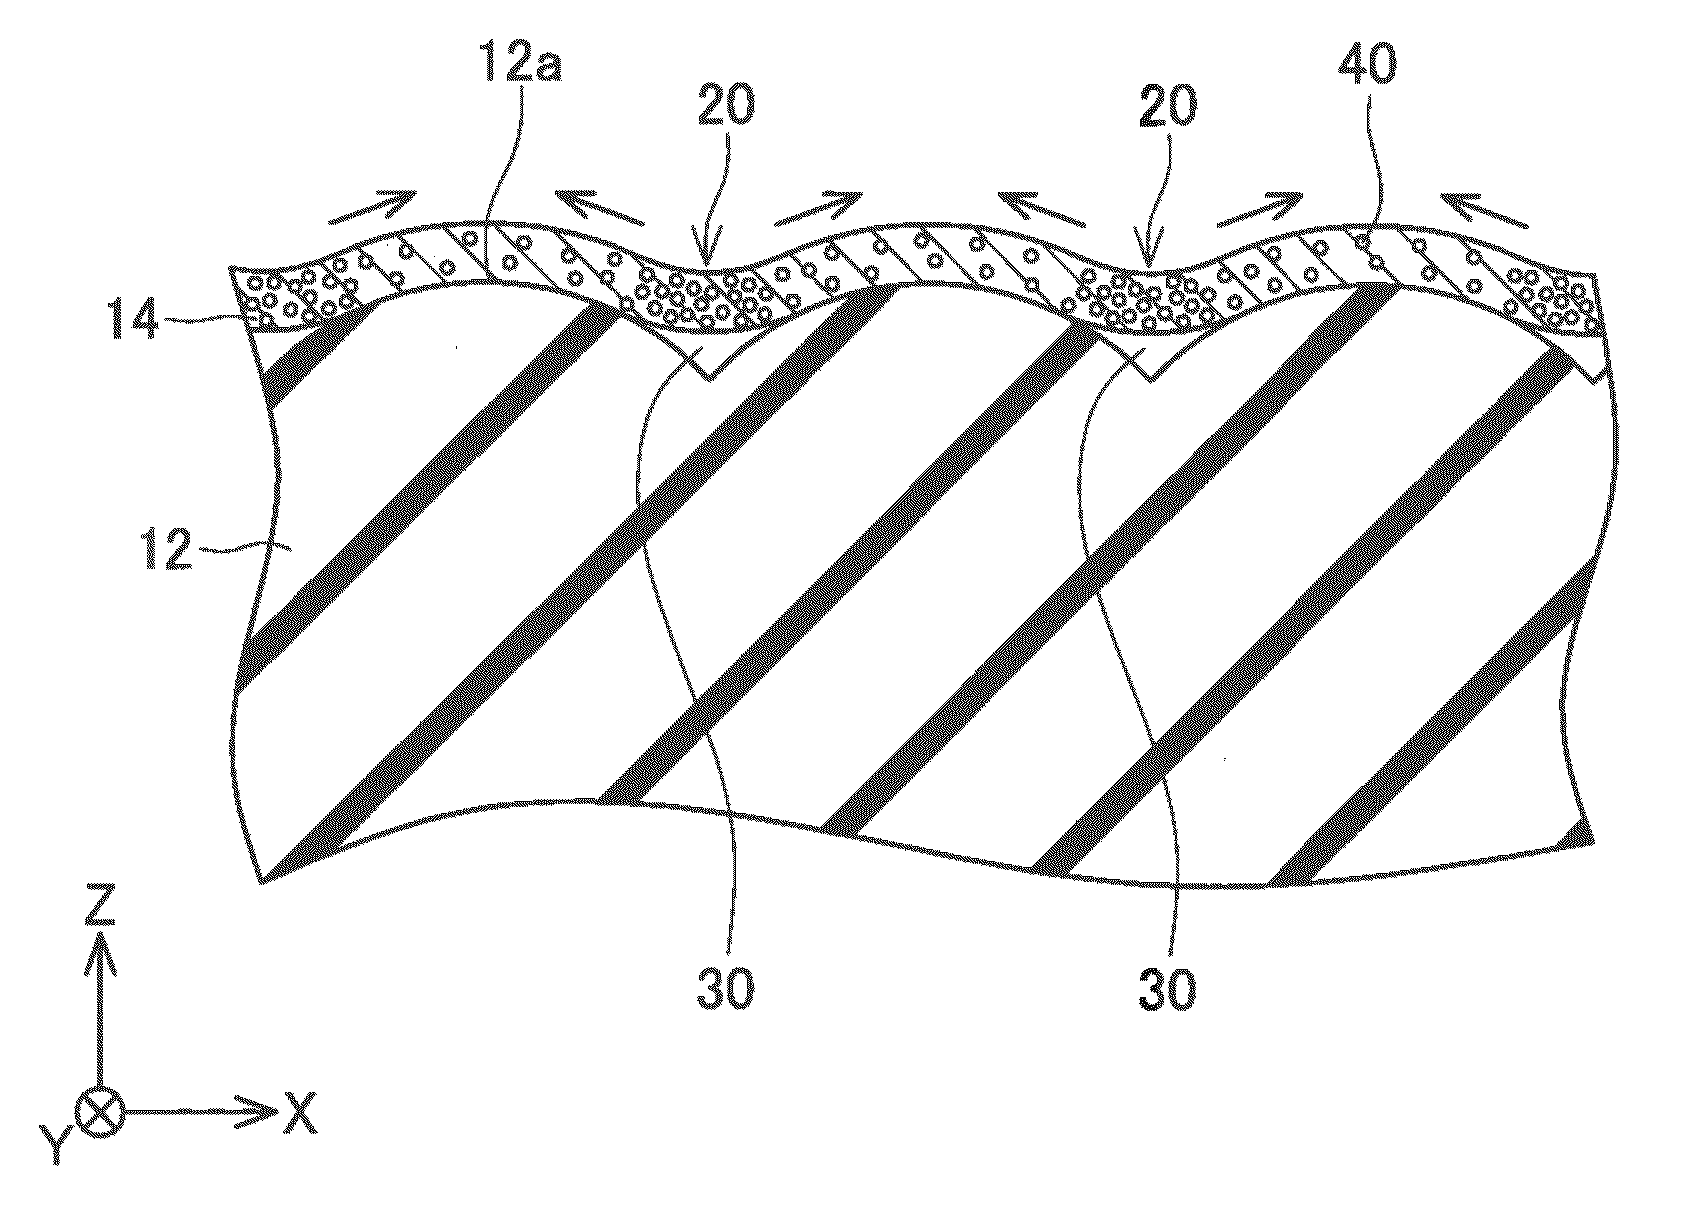 Piezoelectric element and method for manufacturing the same